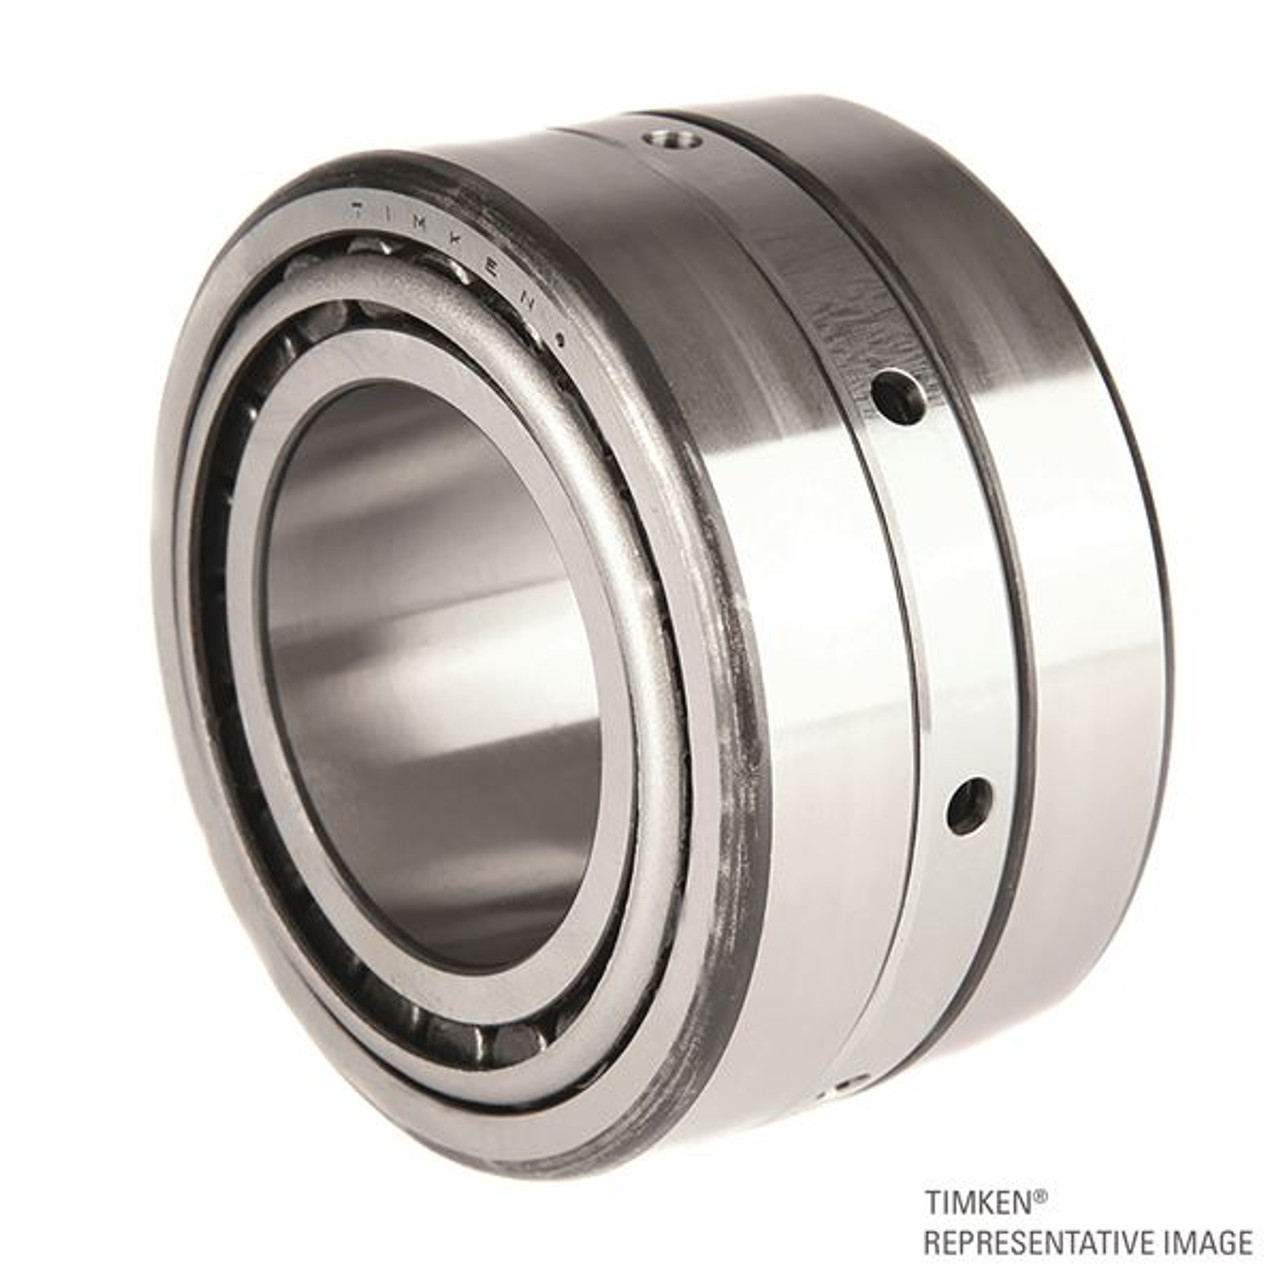 Timken® TDI Single Double Cone Assembly  NA798-902A5